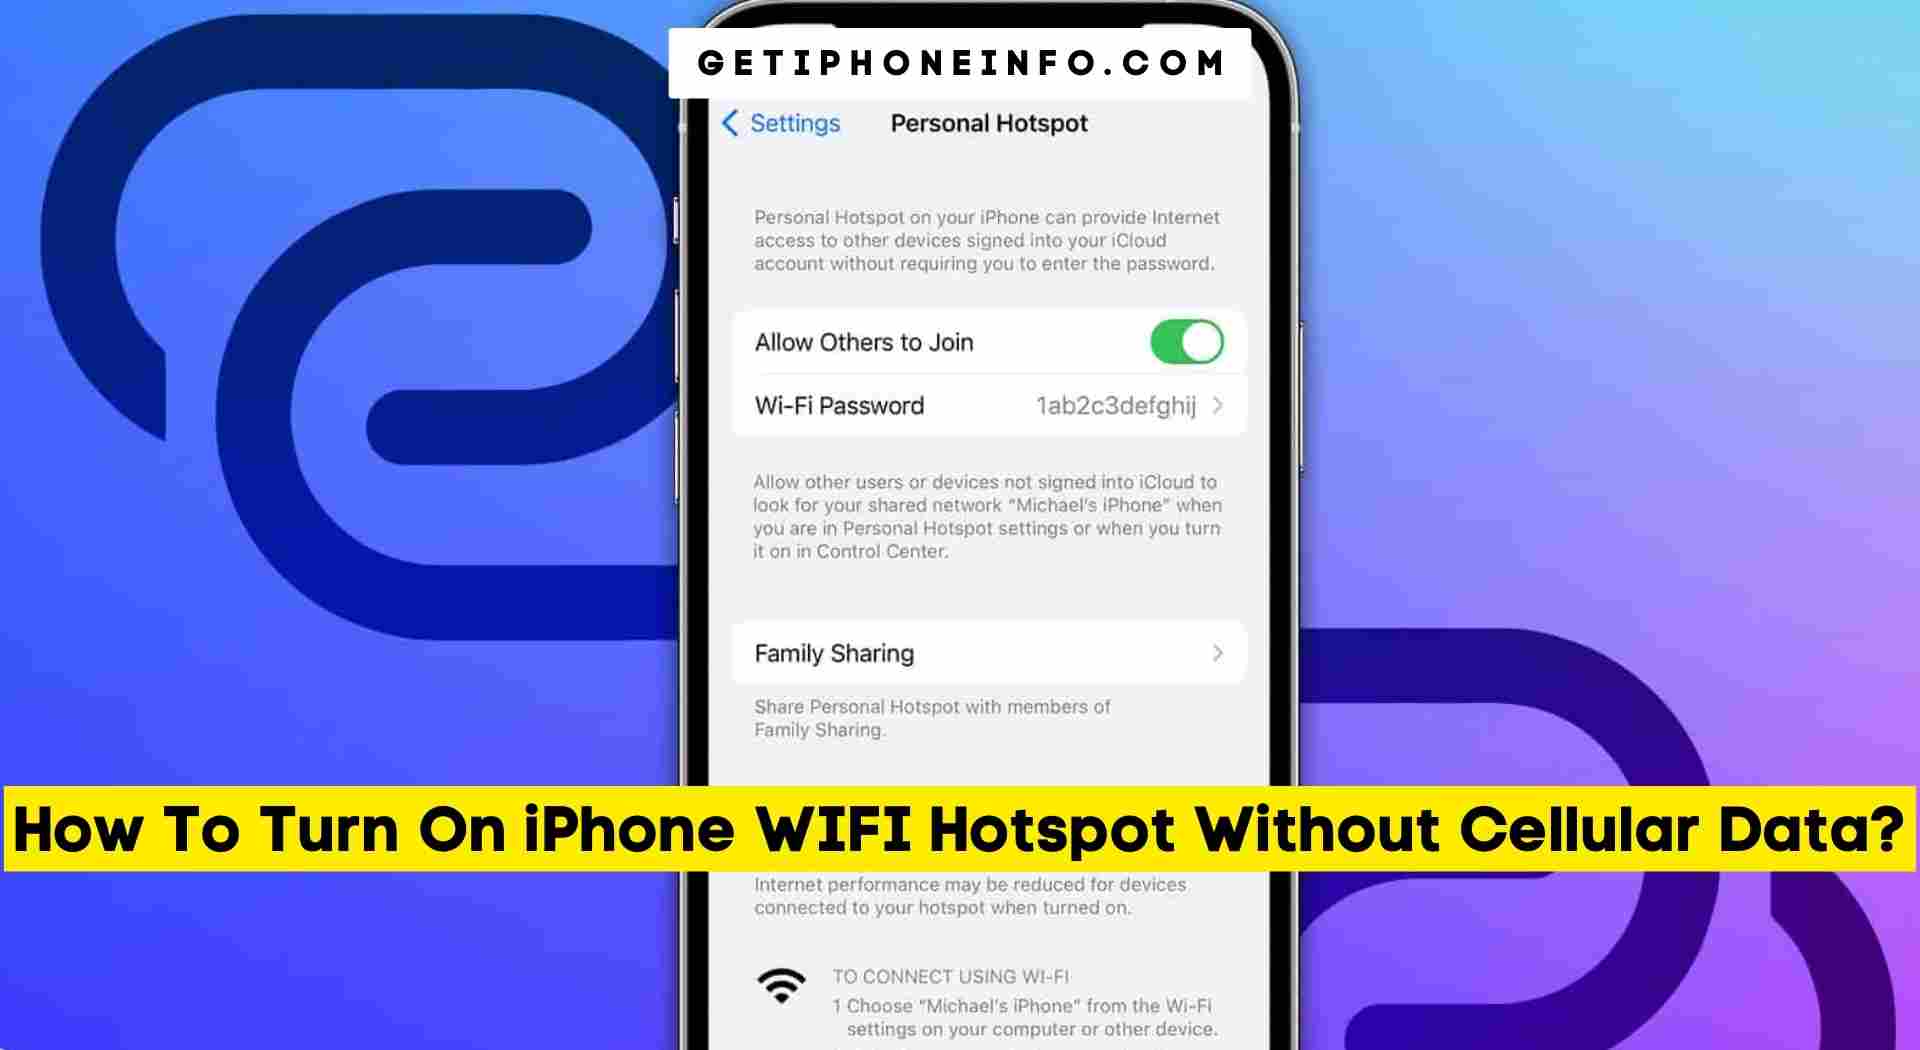 How To Turn On iPhone WIFI Hotspot Without Cellular Data?